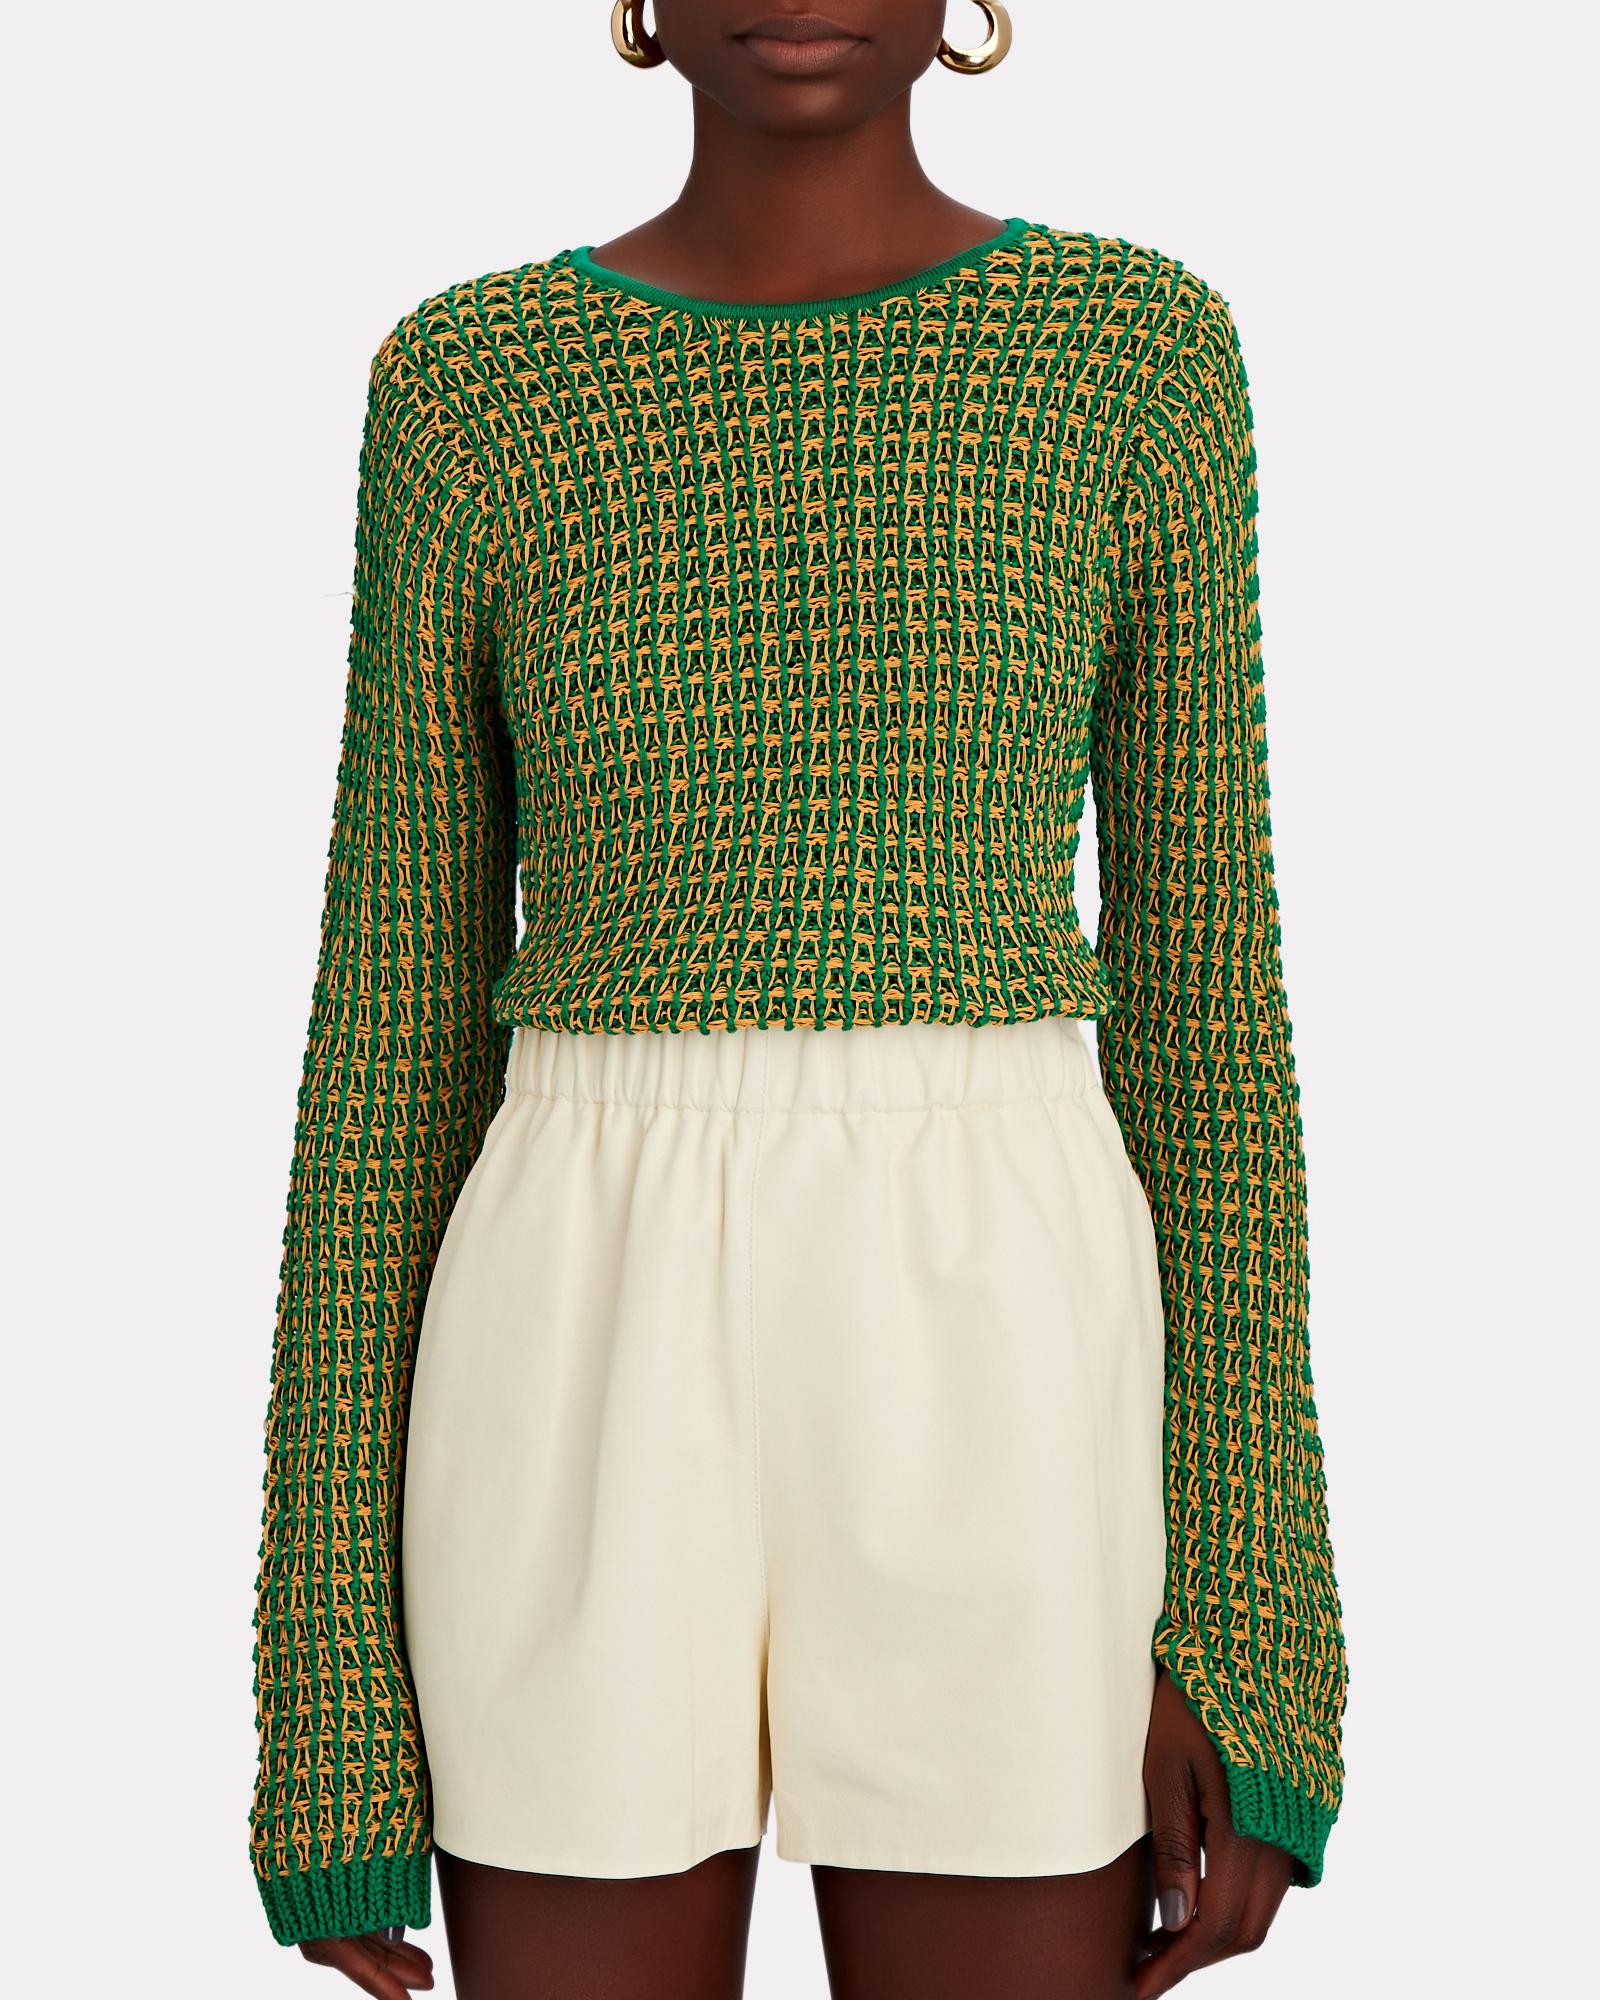 Kedelig Nævne Månens overflade 3.1 Phillip Lim Open-knit Cotton Sweater in Green | Lyst